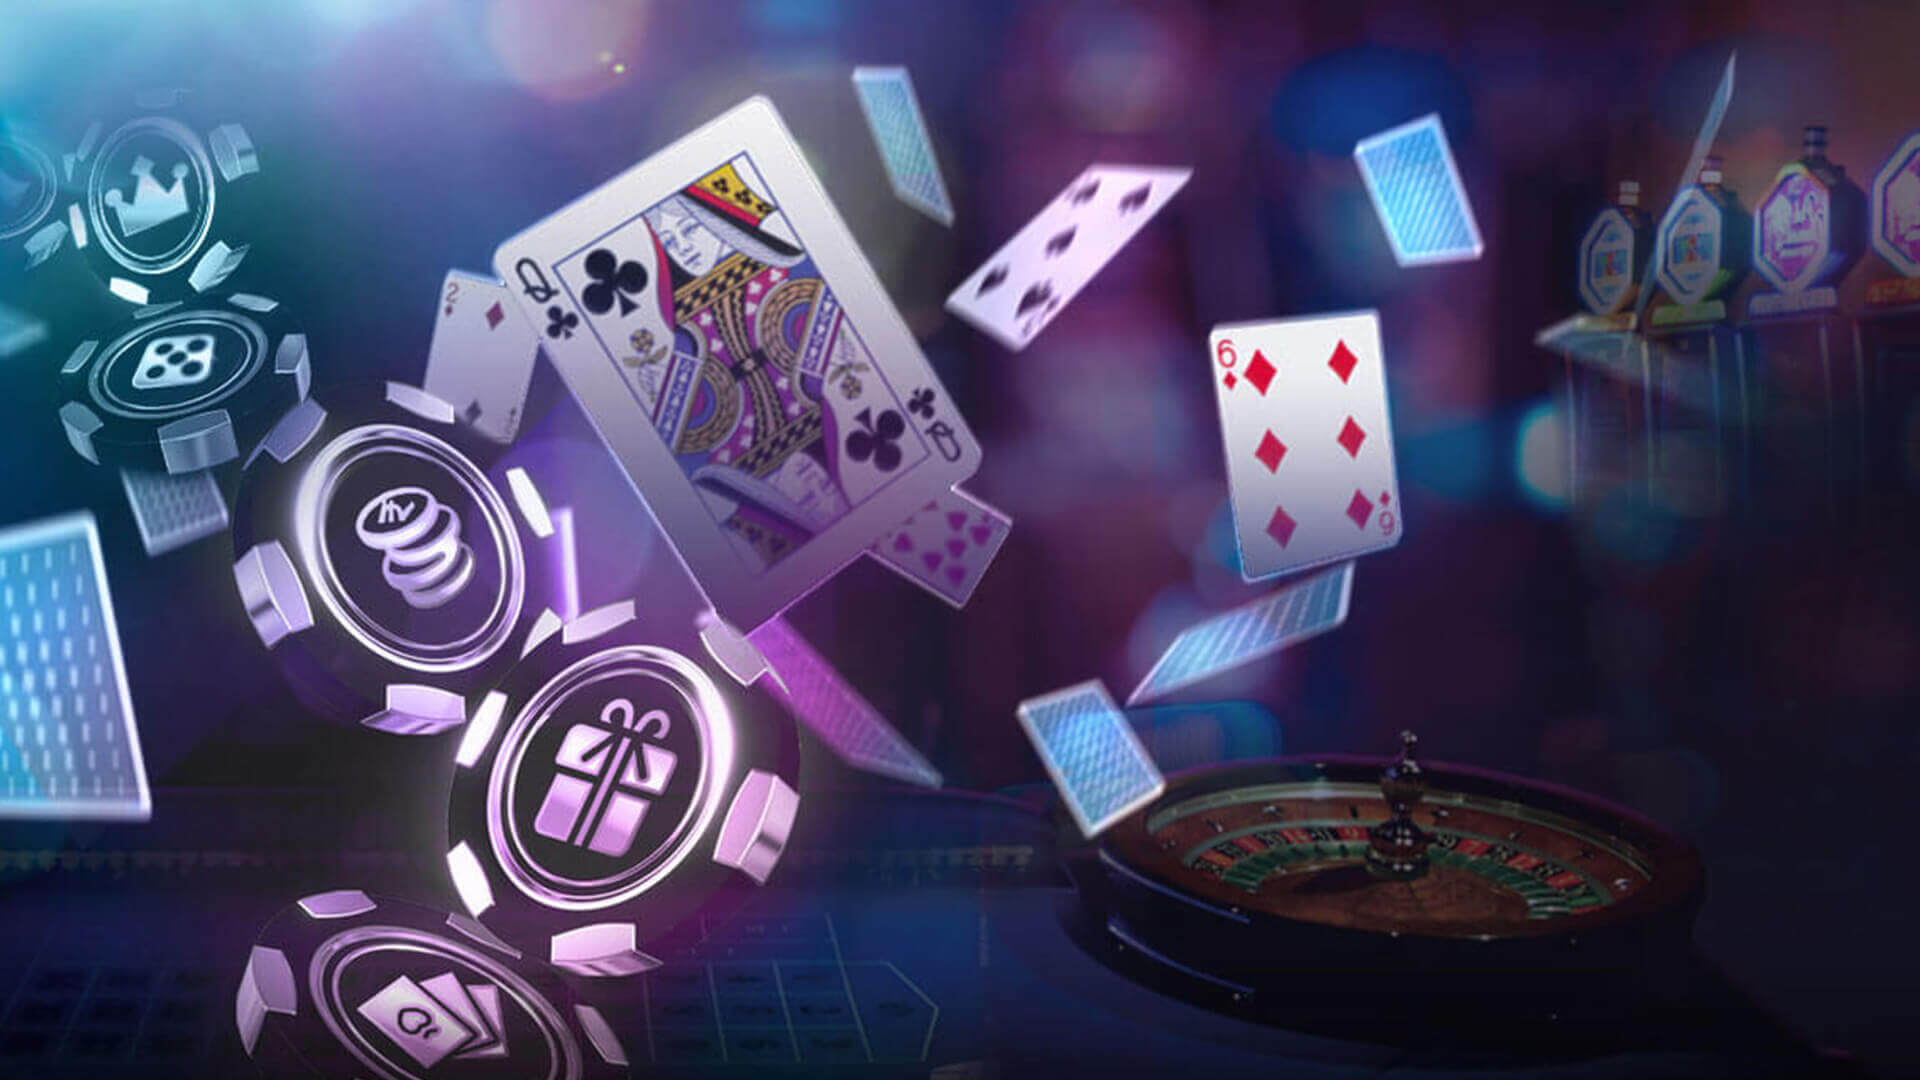 Mastering The Way Of ONLINE SLOT Is Not An Accident – It’s An Art